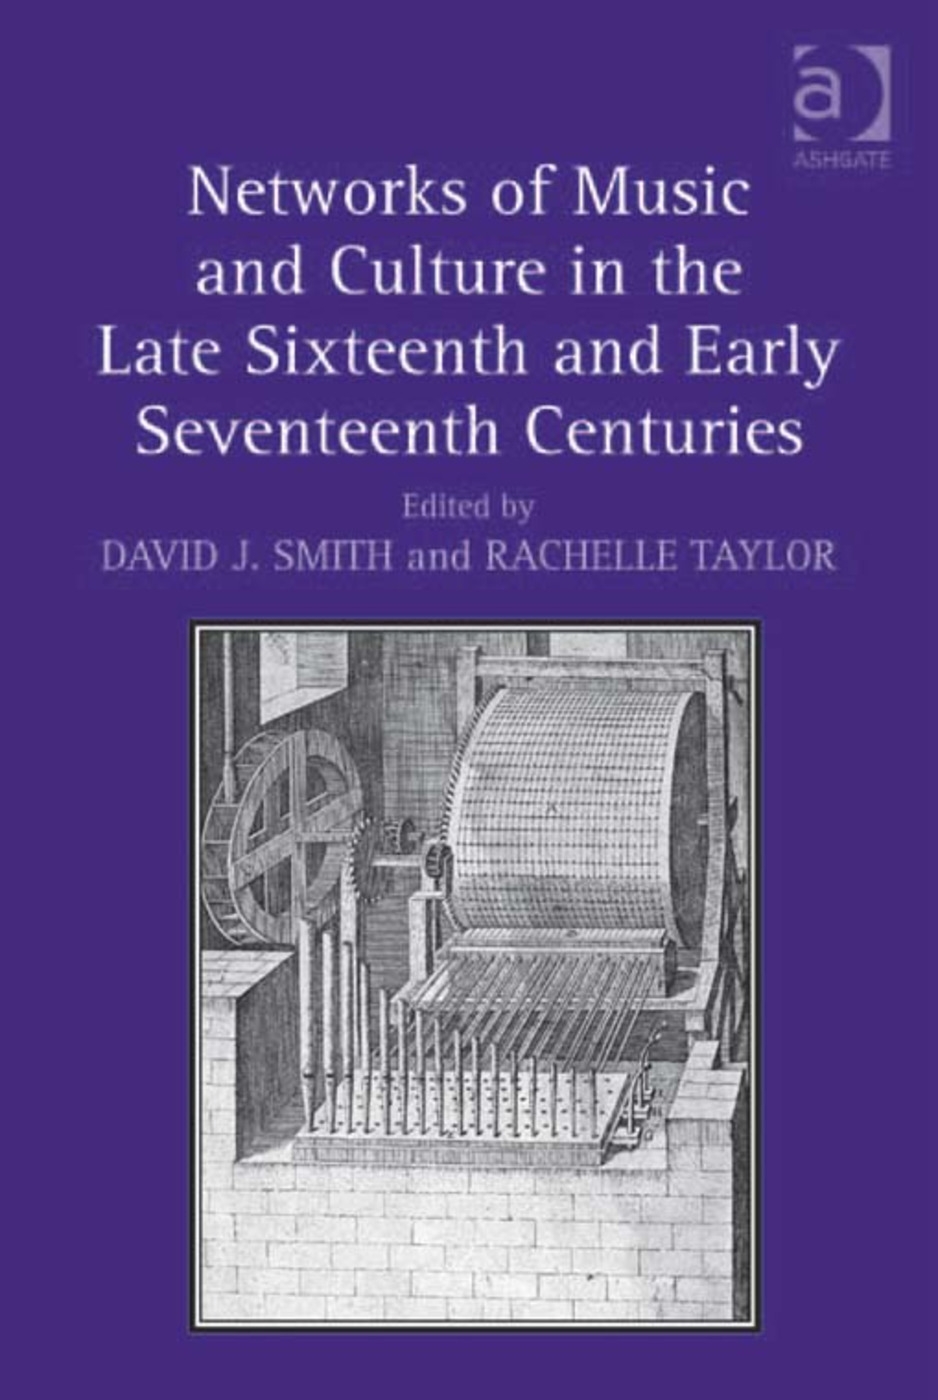 Networks of Music and Culture in the Late Sixteenth and Early Seventeenth Centuries: A Collection of Essays in Celebration of Peter Philips S 450th An